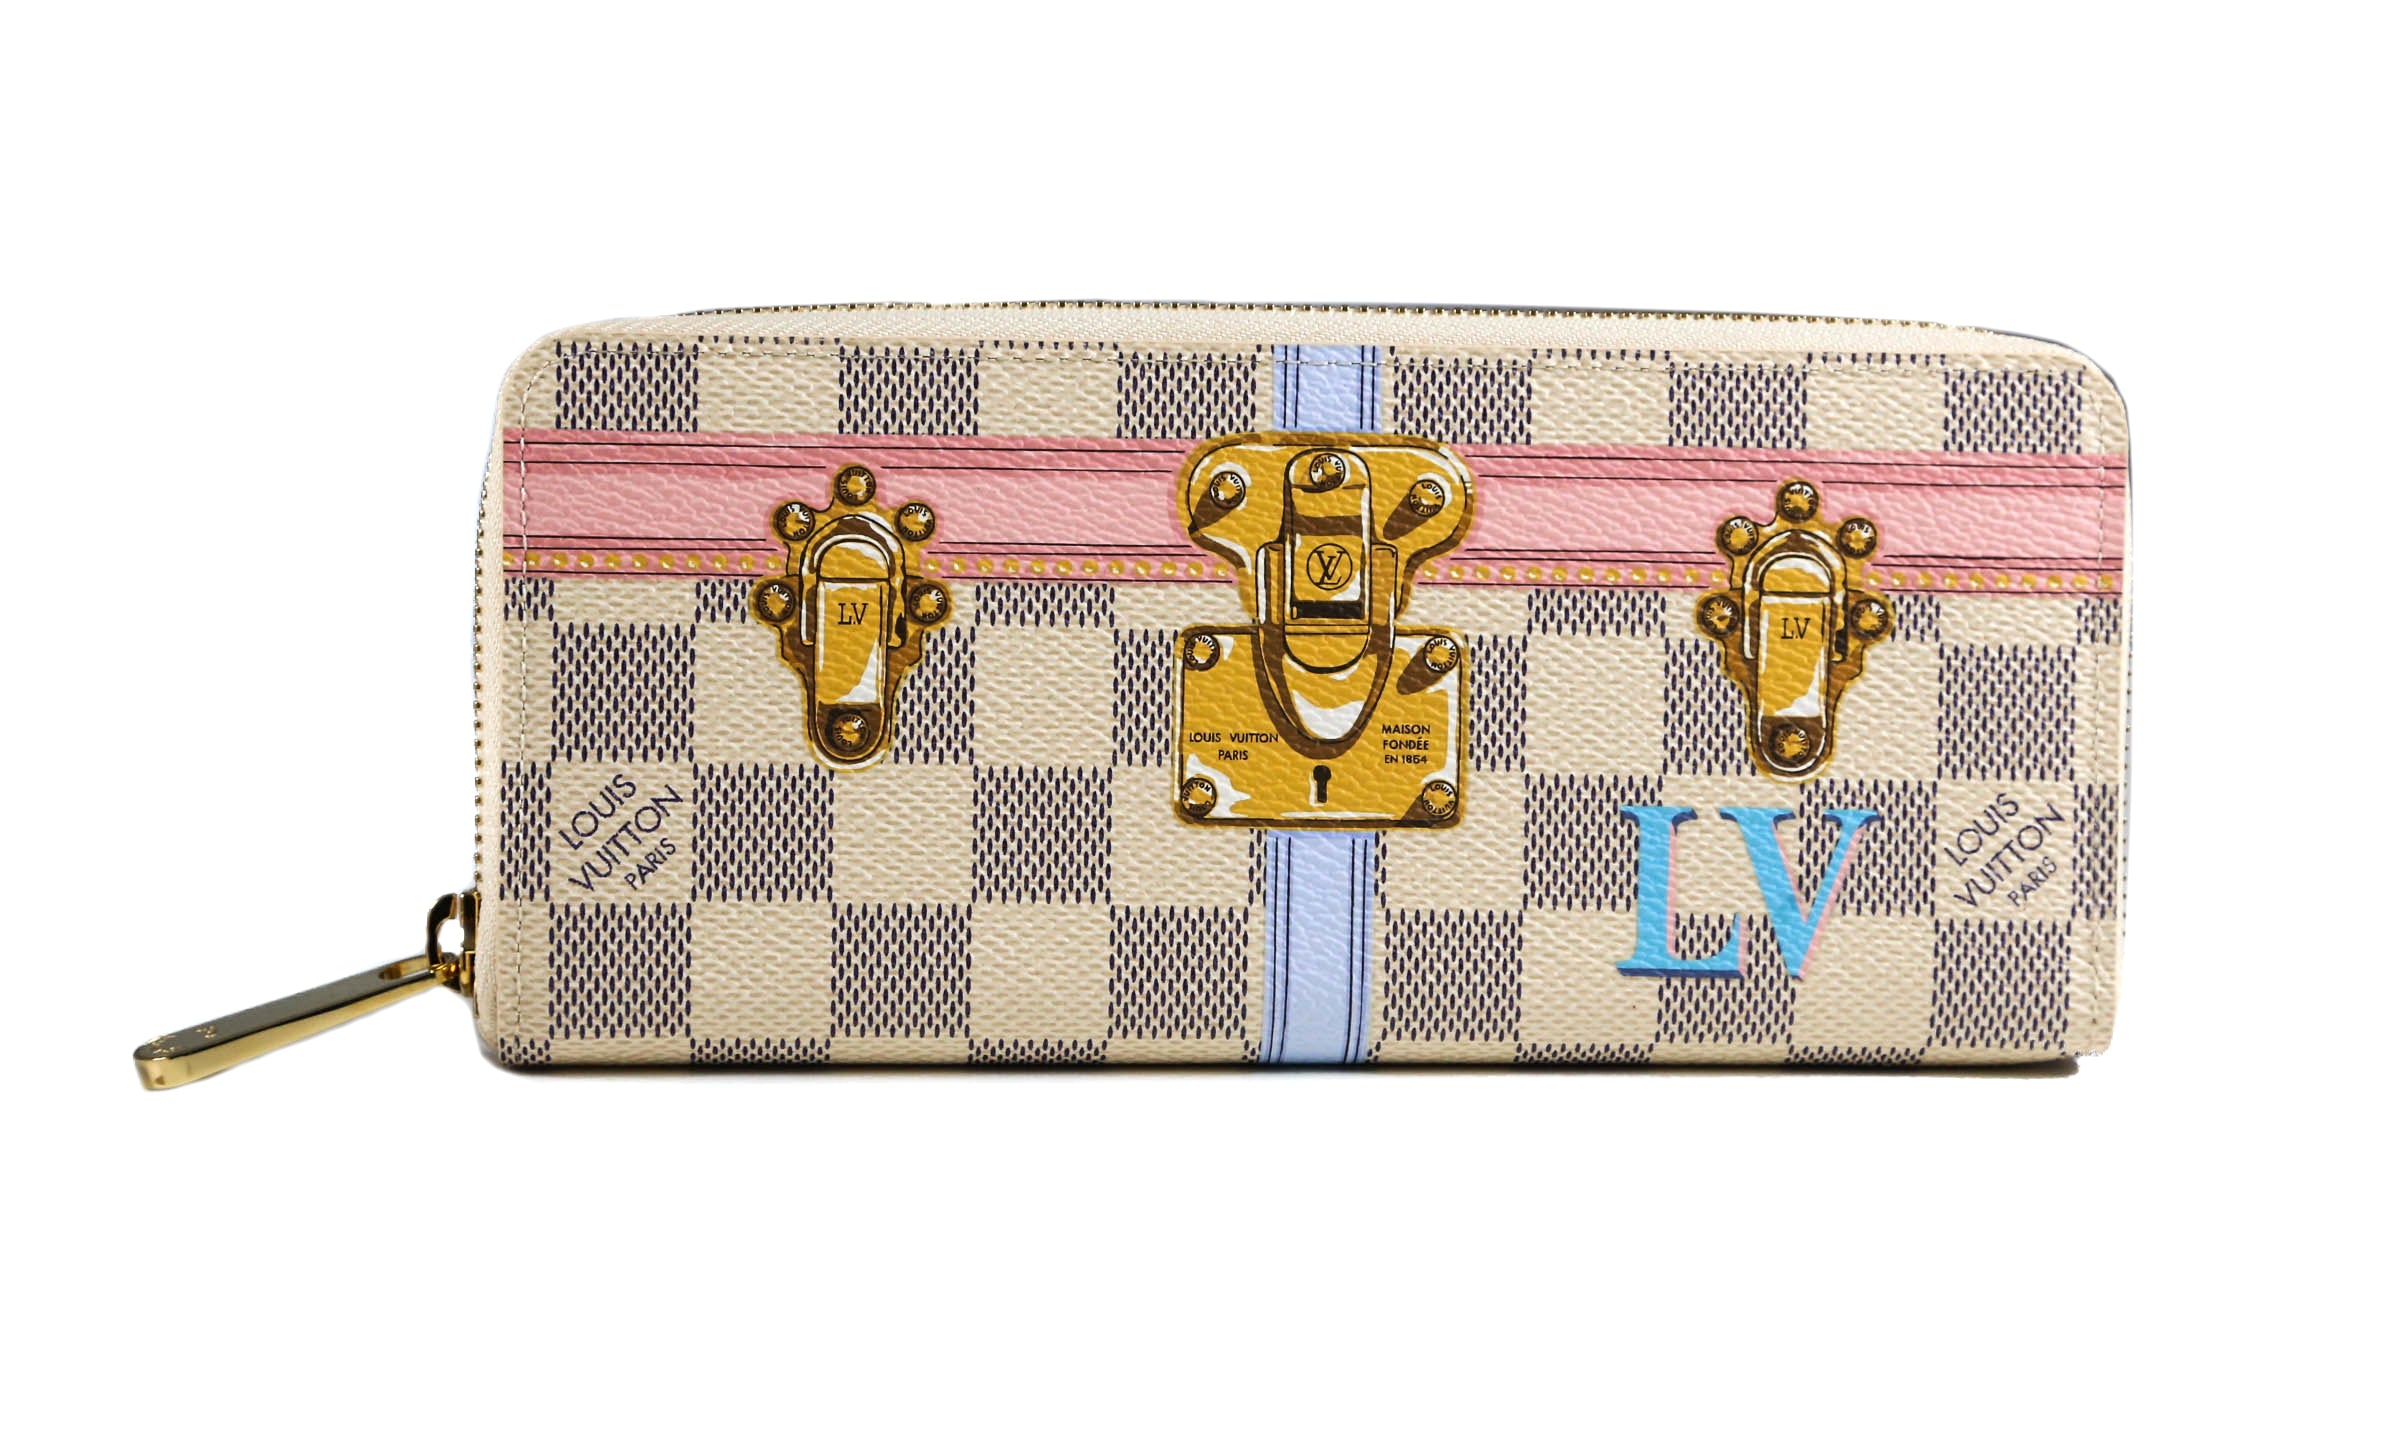 Louis Vuitton Trunks & Bags Wallet - One Savvy Design Luxury Consignment